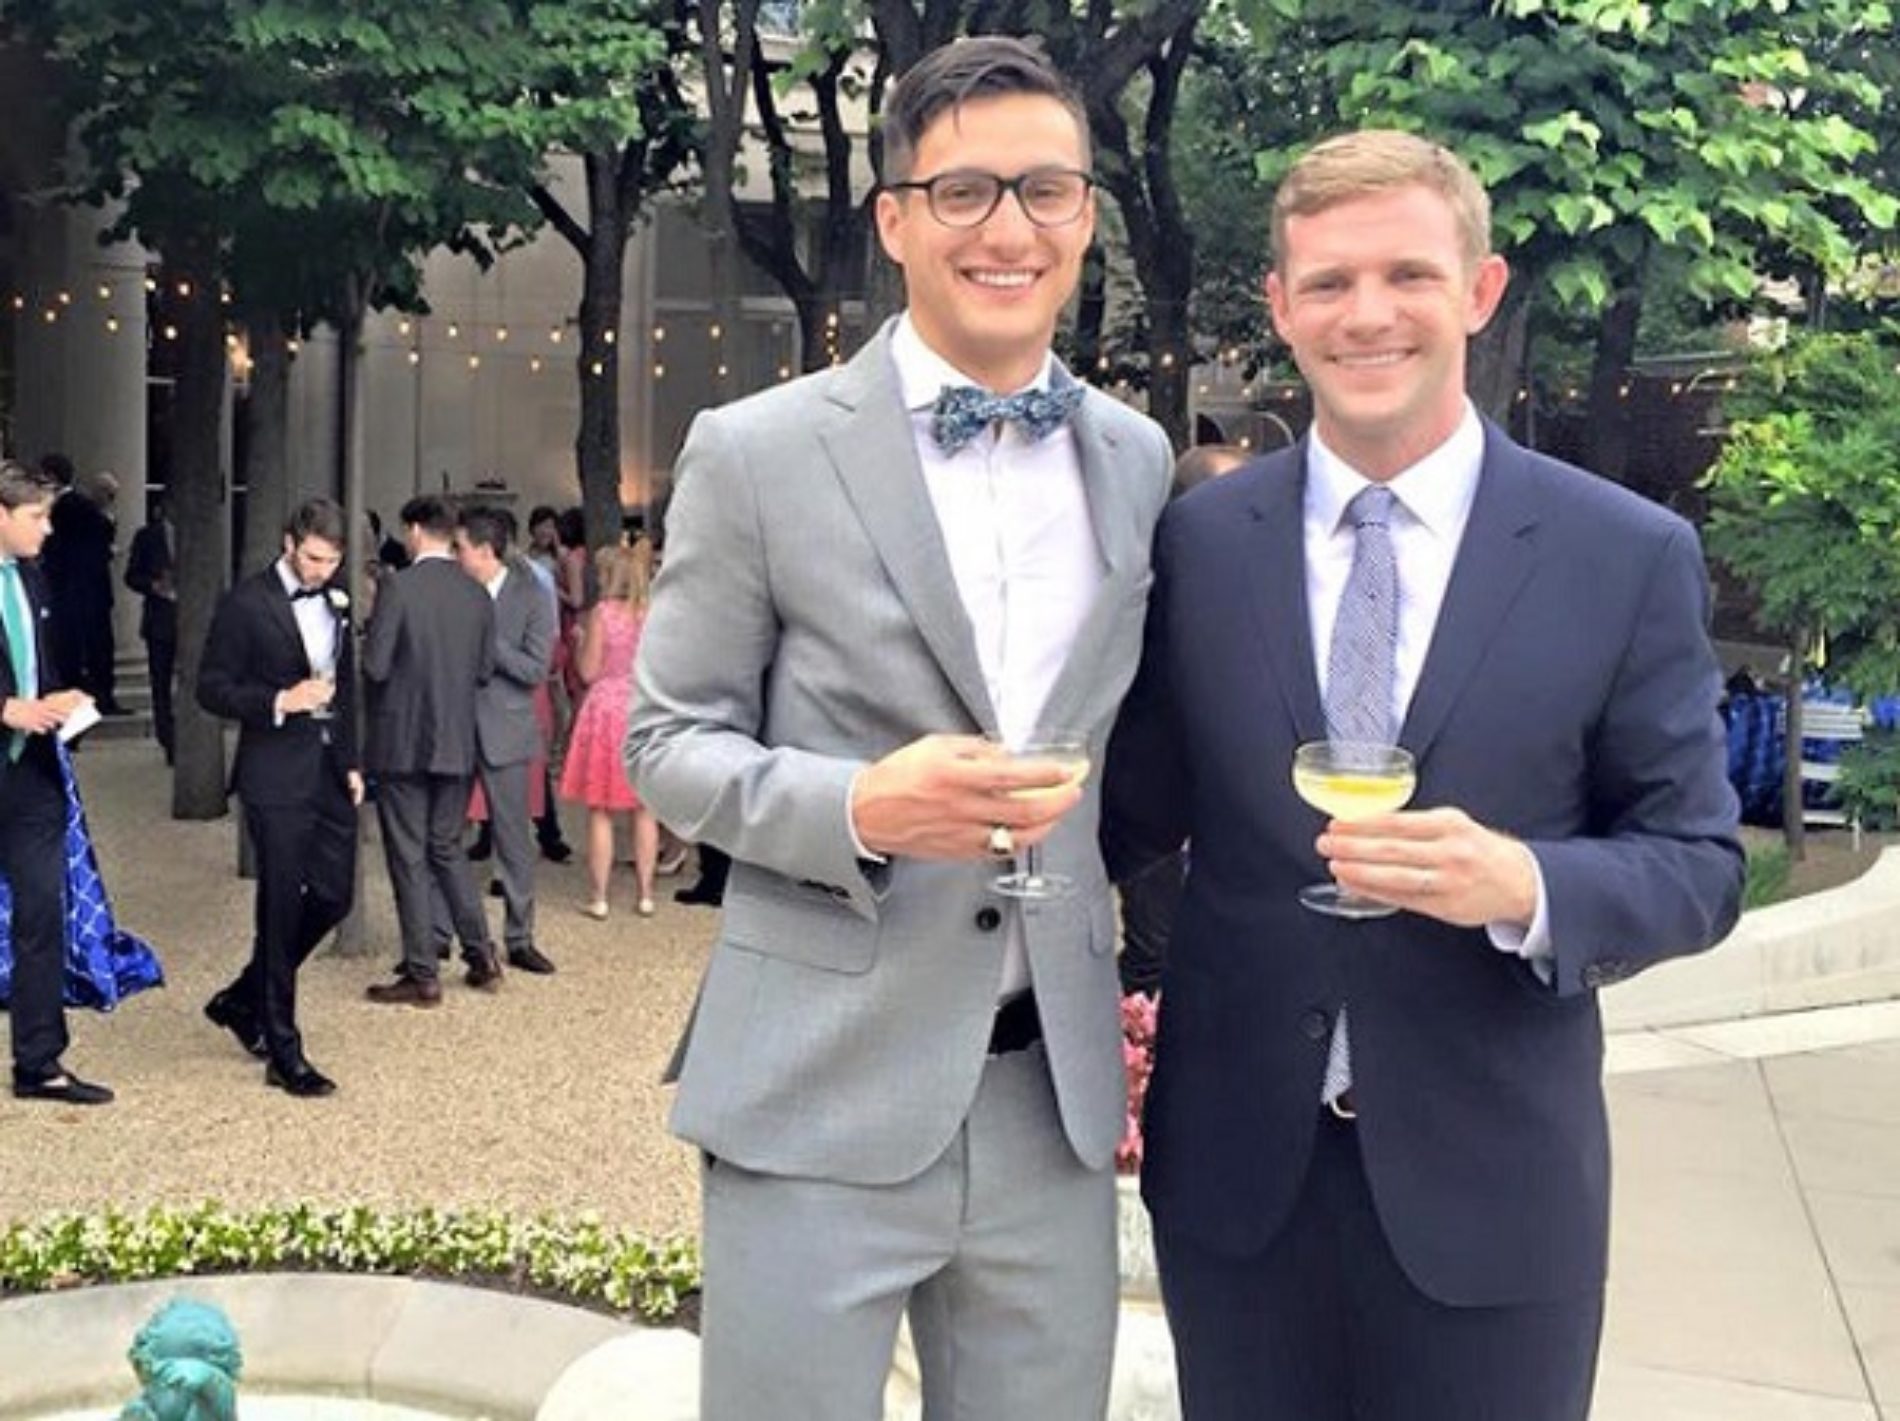 Man Attacks Gay Couple Who Graduated From West Point, And Gets His Ass Subsequently Handed to Him